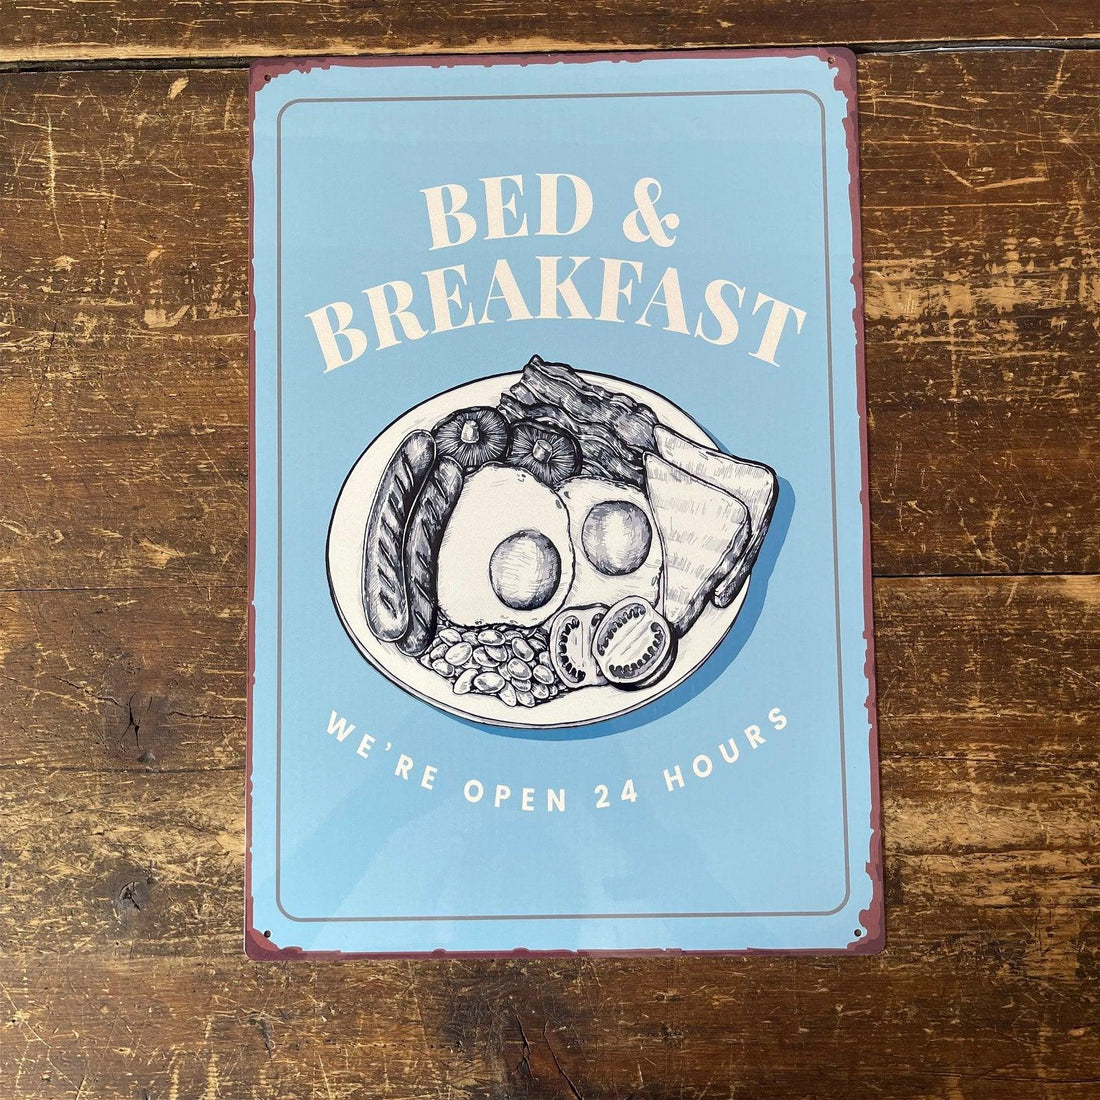 Vintage Metal Sign - Bed And Breakfast Sign - £27.99 - Signs & Rules 